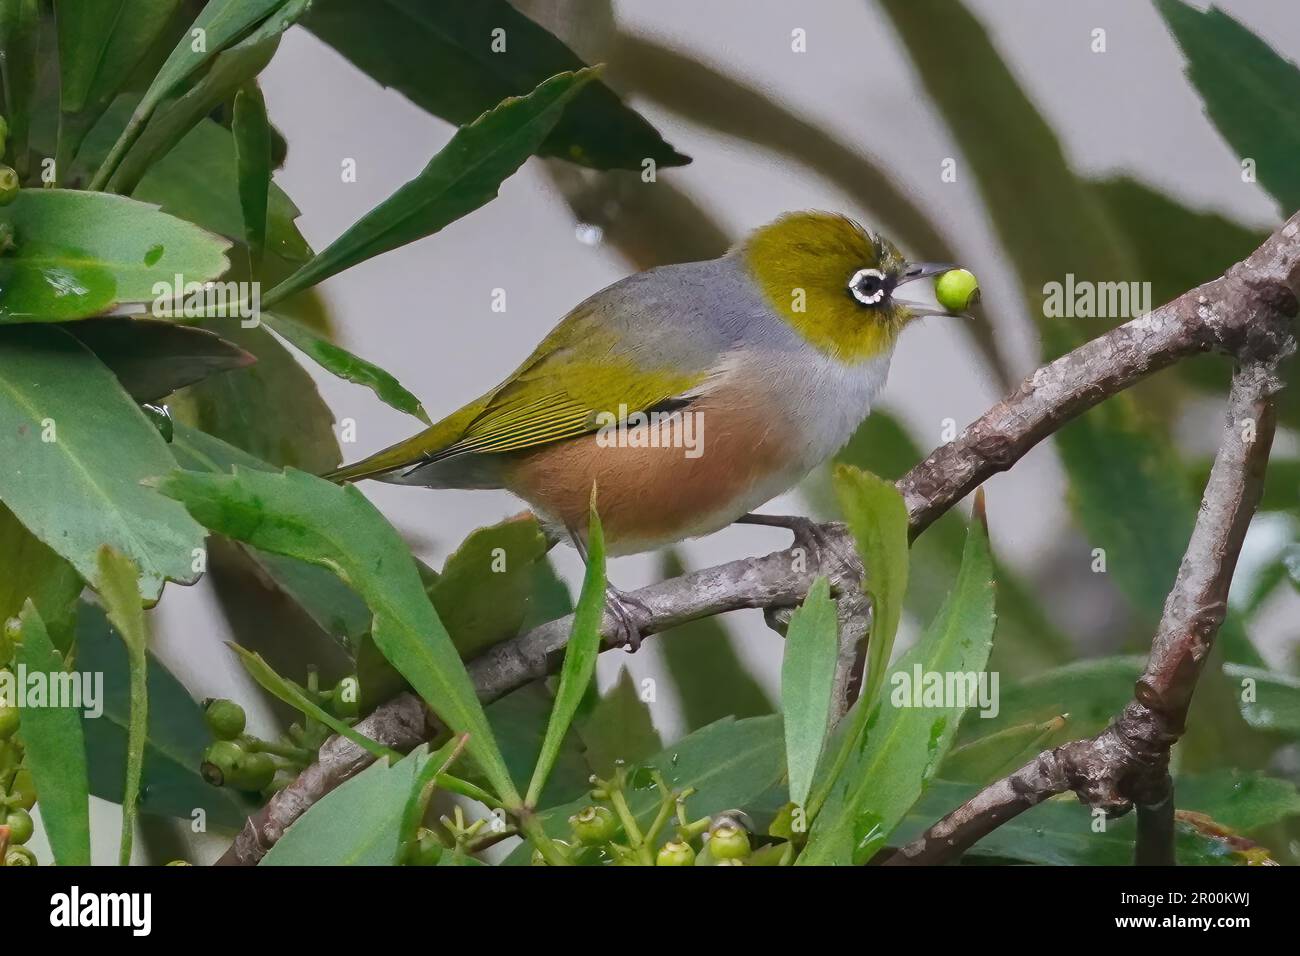 Cute Silvereye or Waxeye eating a berry from a tree Stock Photo